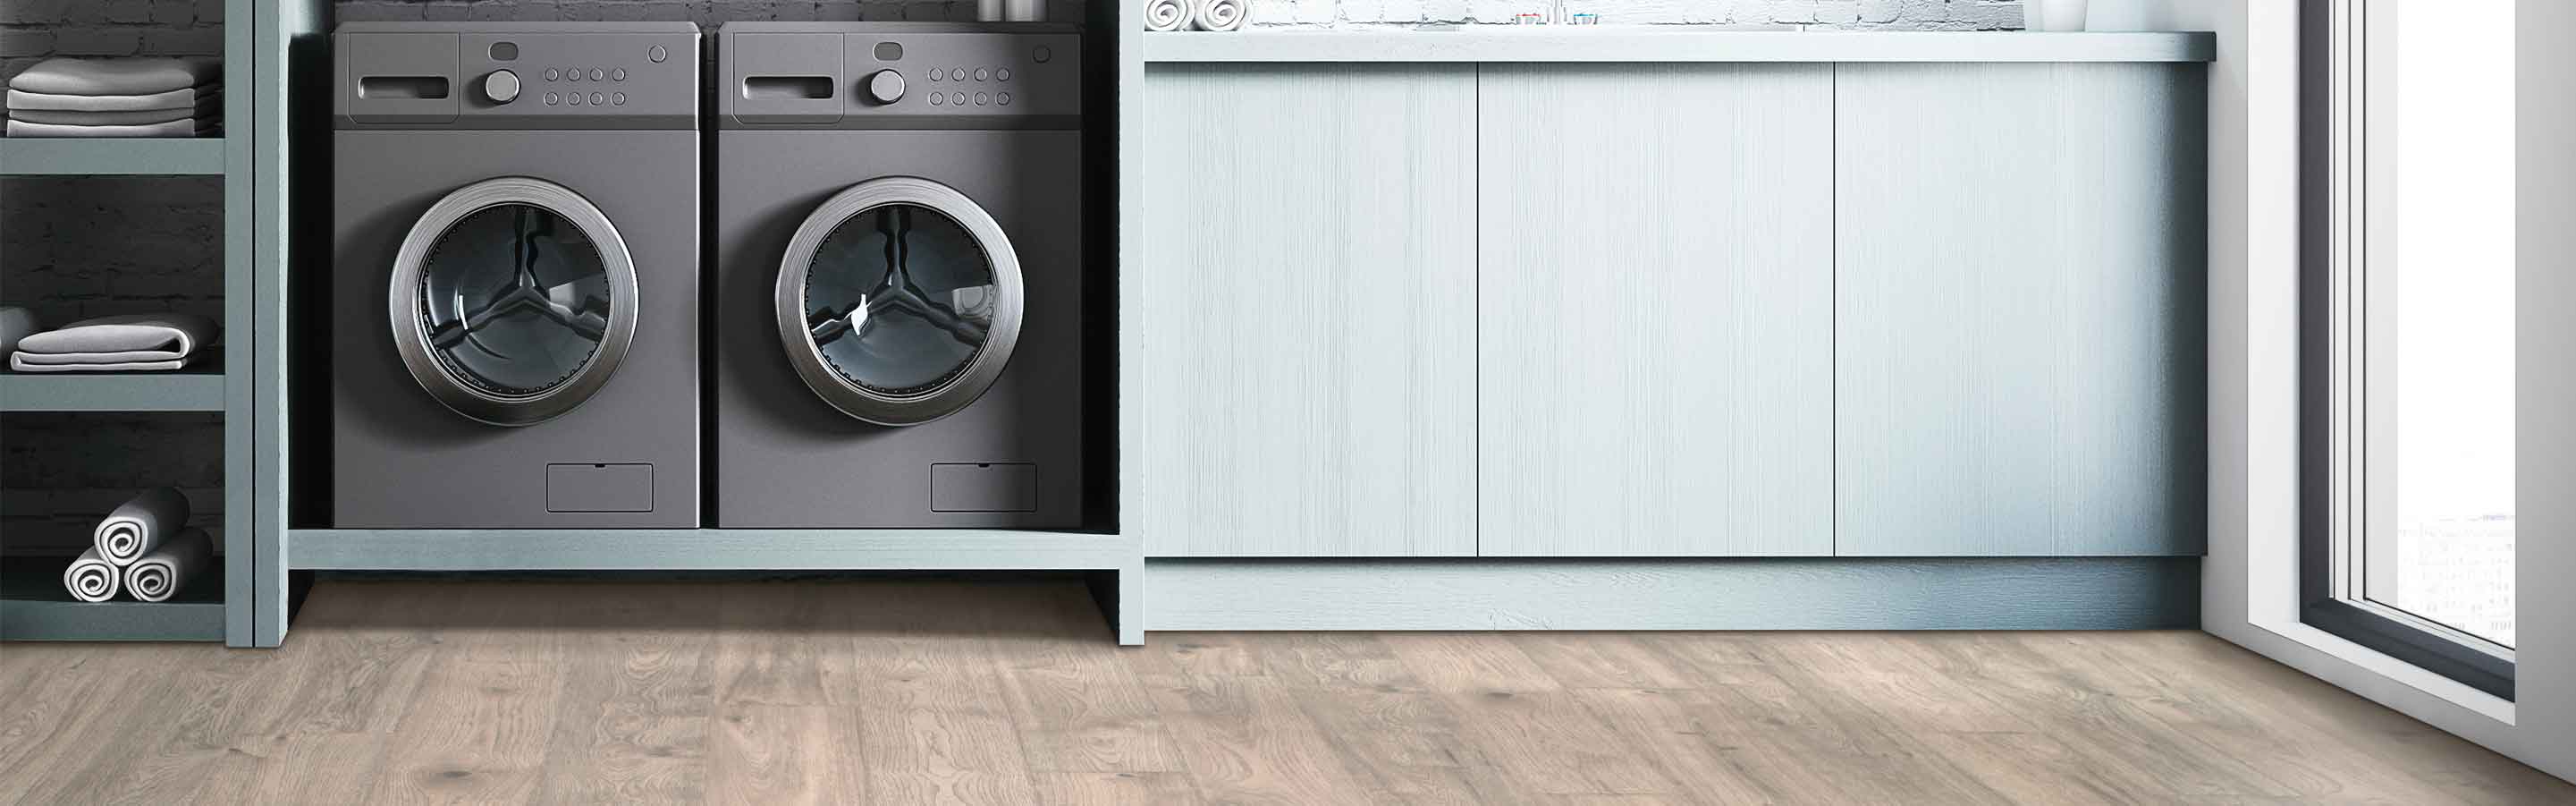 natural wood-look laminate flooring in laundry room with gray washer and dryer